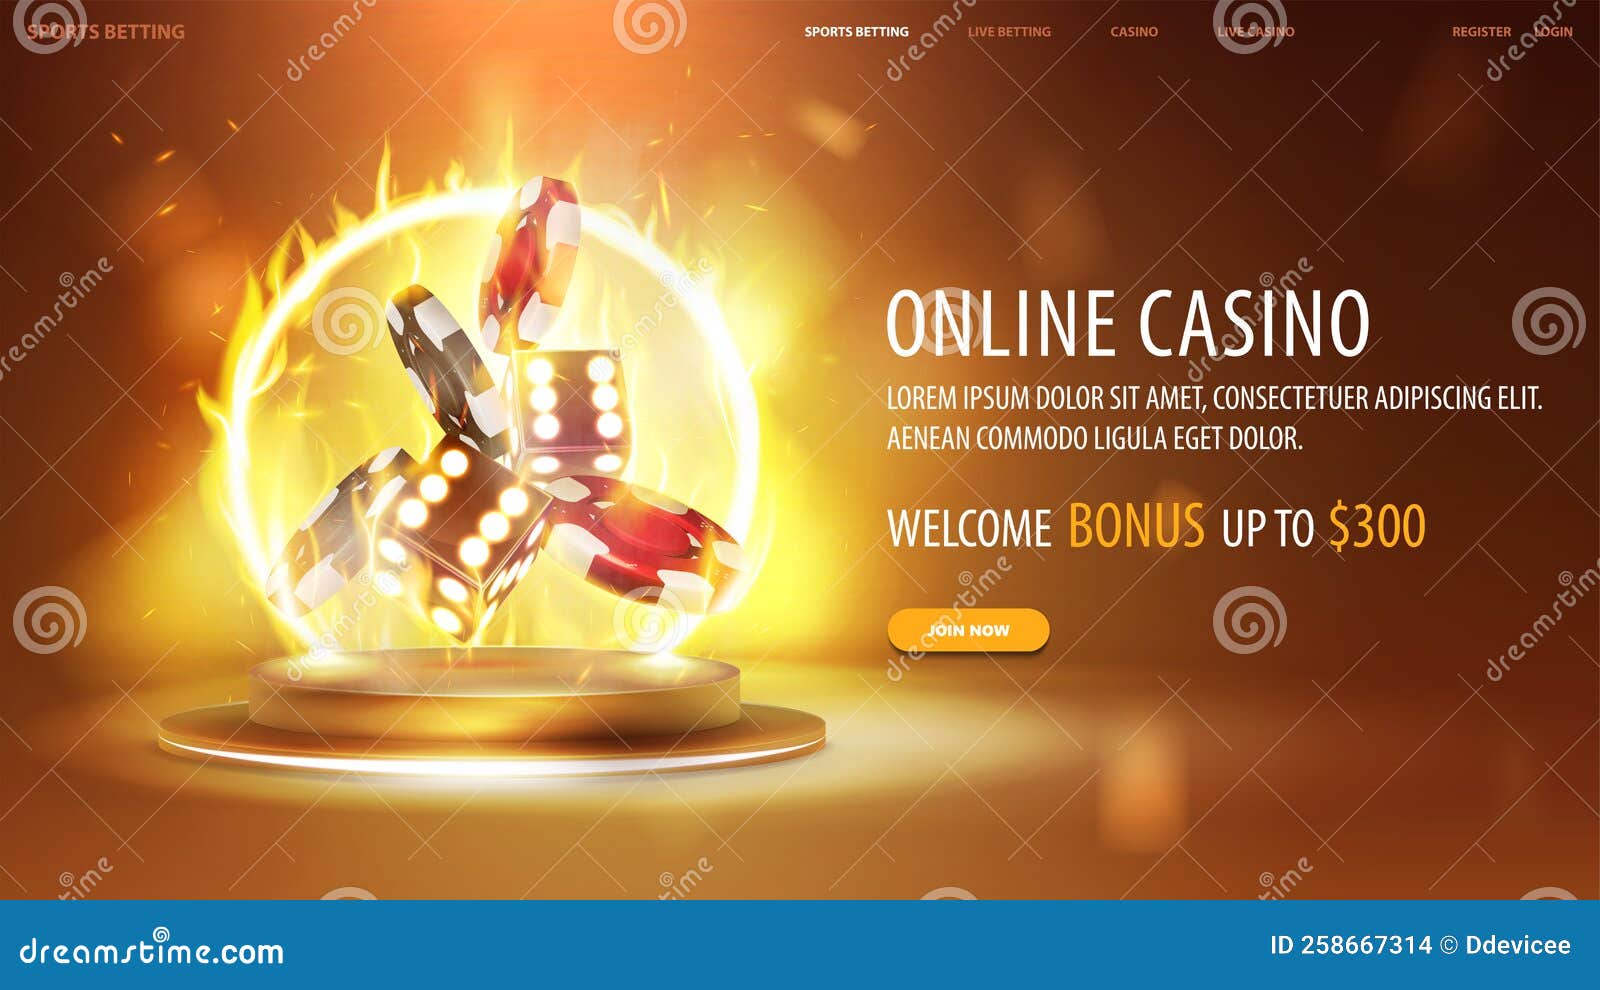 online casino yellow banner gold d dice stack chips podium neon ring fire realistic vector illustration 258667314